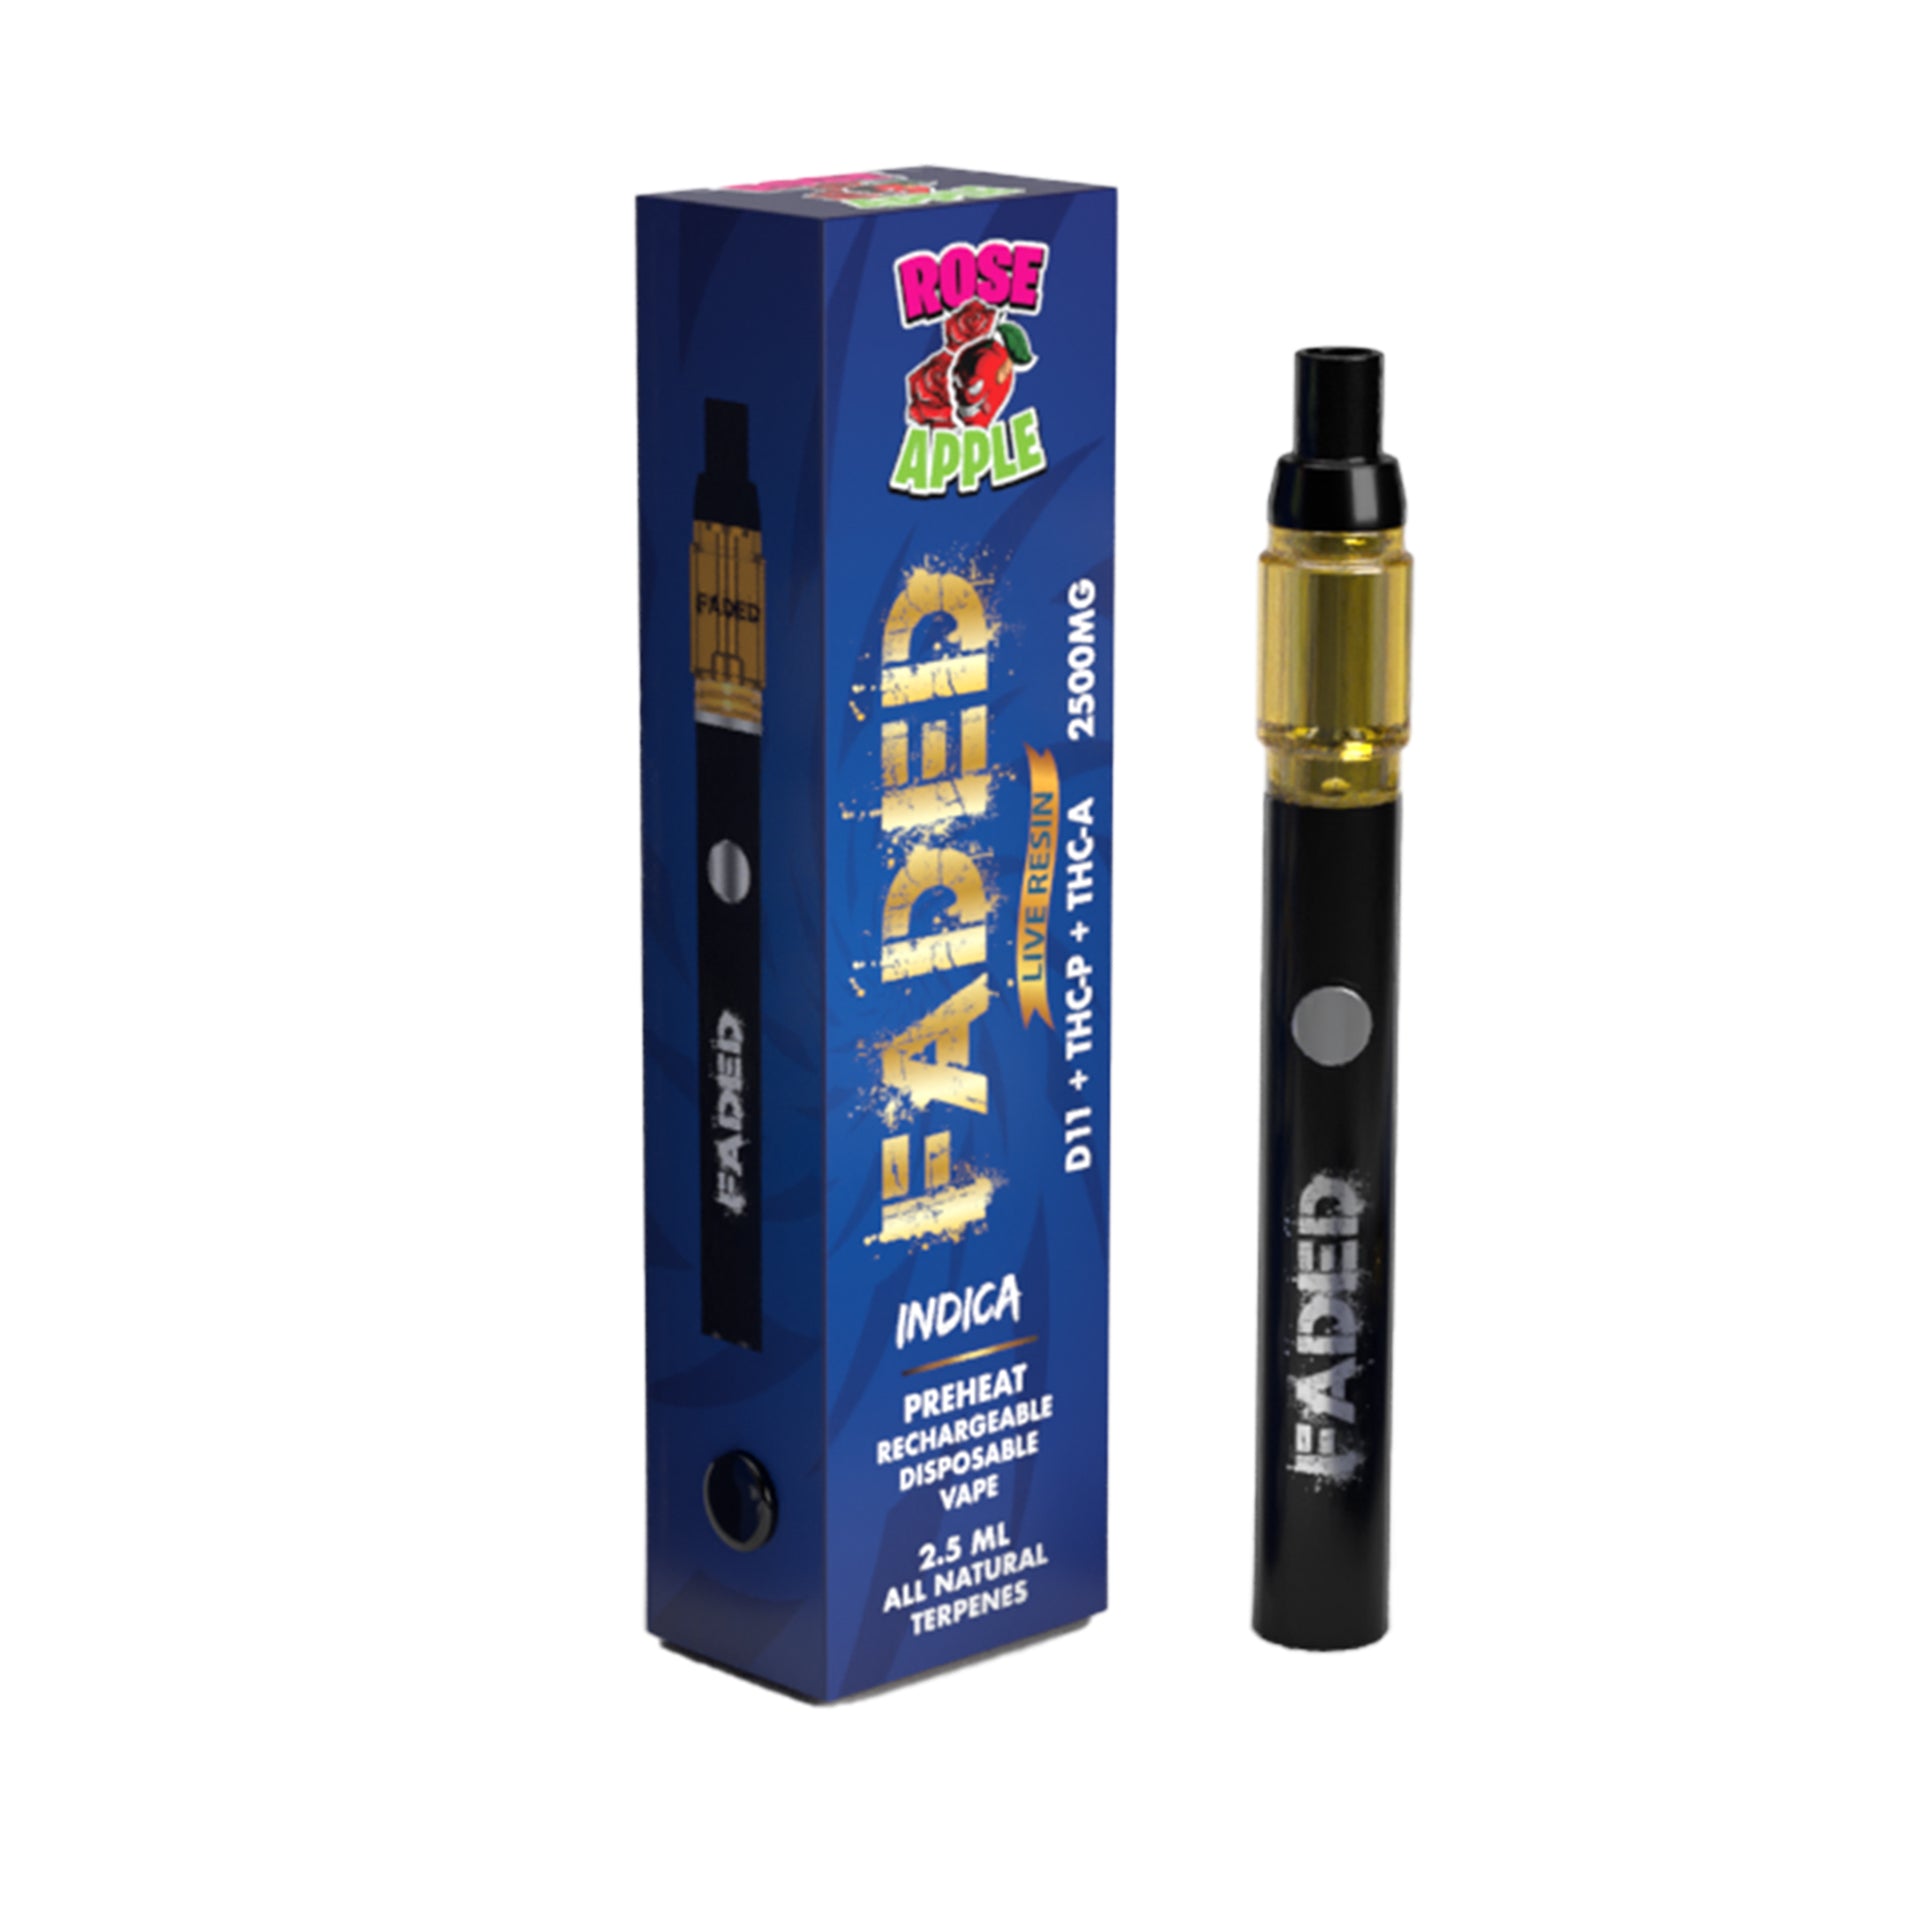 FADED DELTA-11+THC-P+THC-A RECHARGEABLE DISPOSABLE - INDICA ROSE APPLE 2.5ML